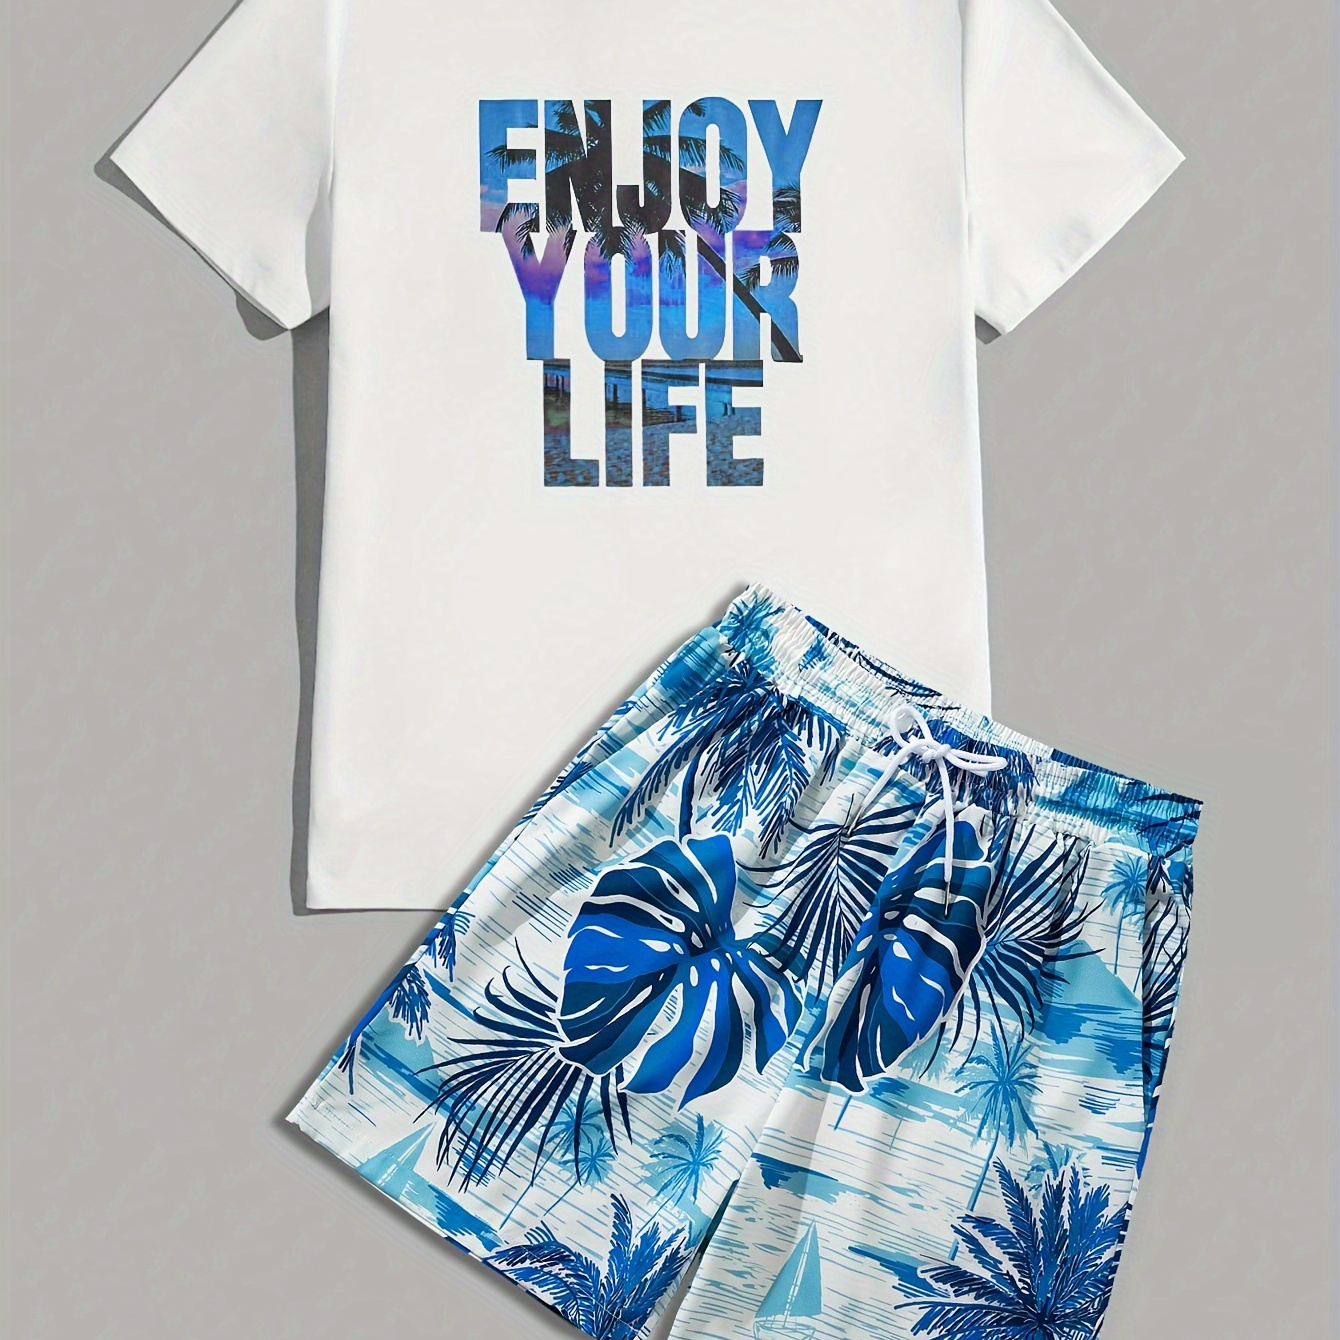 

Men's Casual Outfit, Summer T-shirt & Shorts Set, Comfortable Crew Neck Tee With Stylish Letter Print, Breathable Hawaiian Shorts With Drawstring Co Ord Set